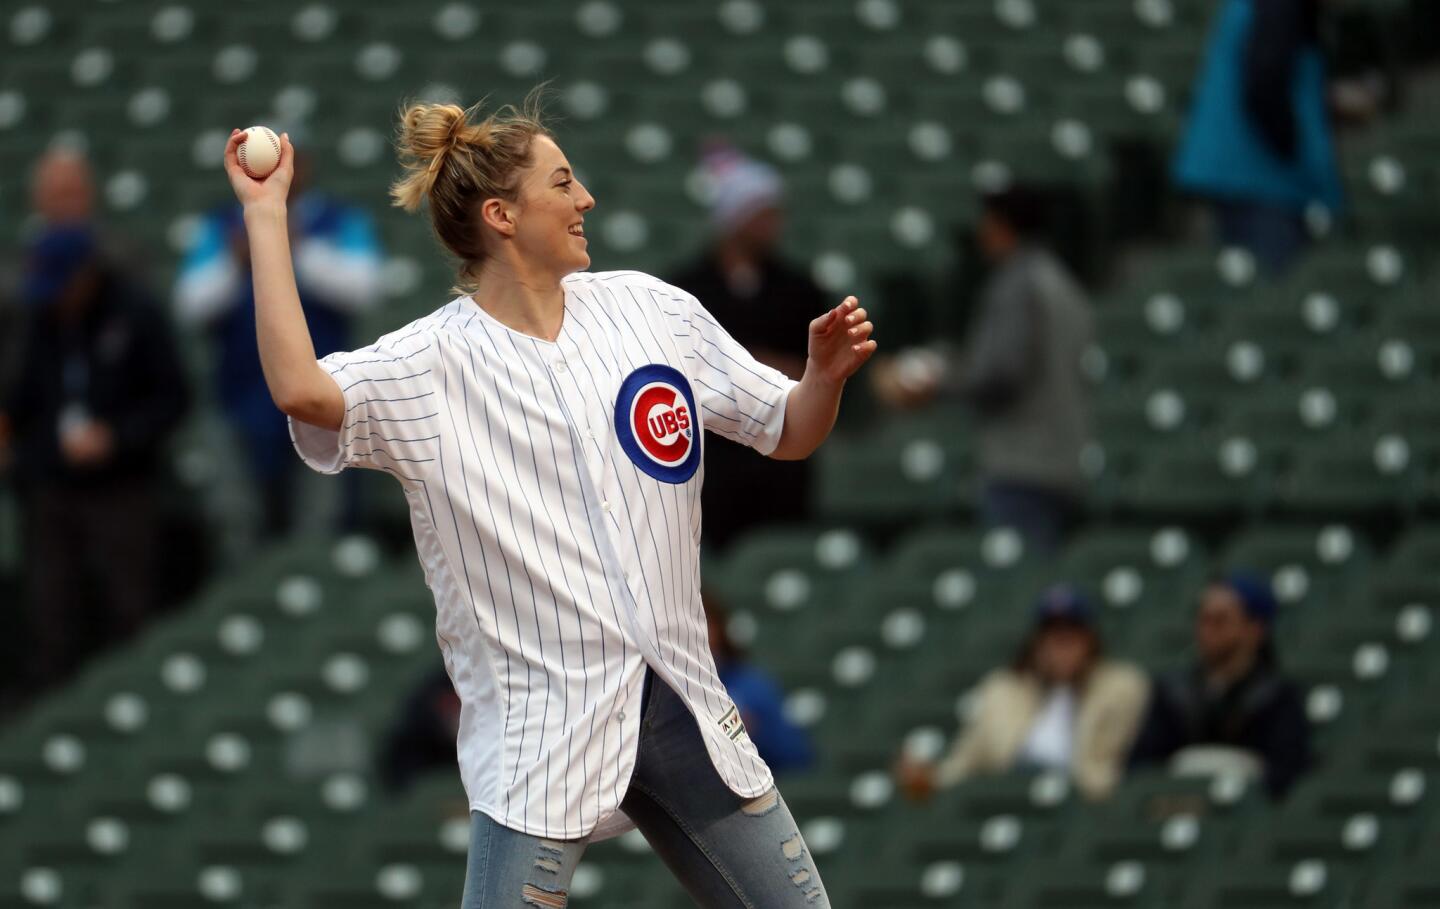 The Chicago Sky's Katie Lou Samuelson throws out a ceremonial first pitch before a Cubs-Marlins game at Wrigley Field on May 8, 2019.